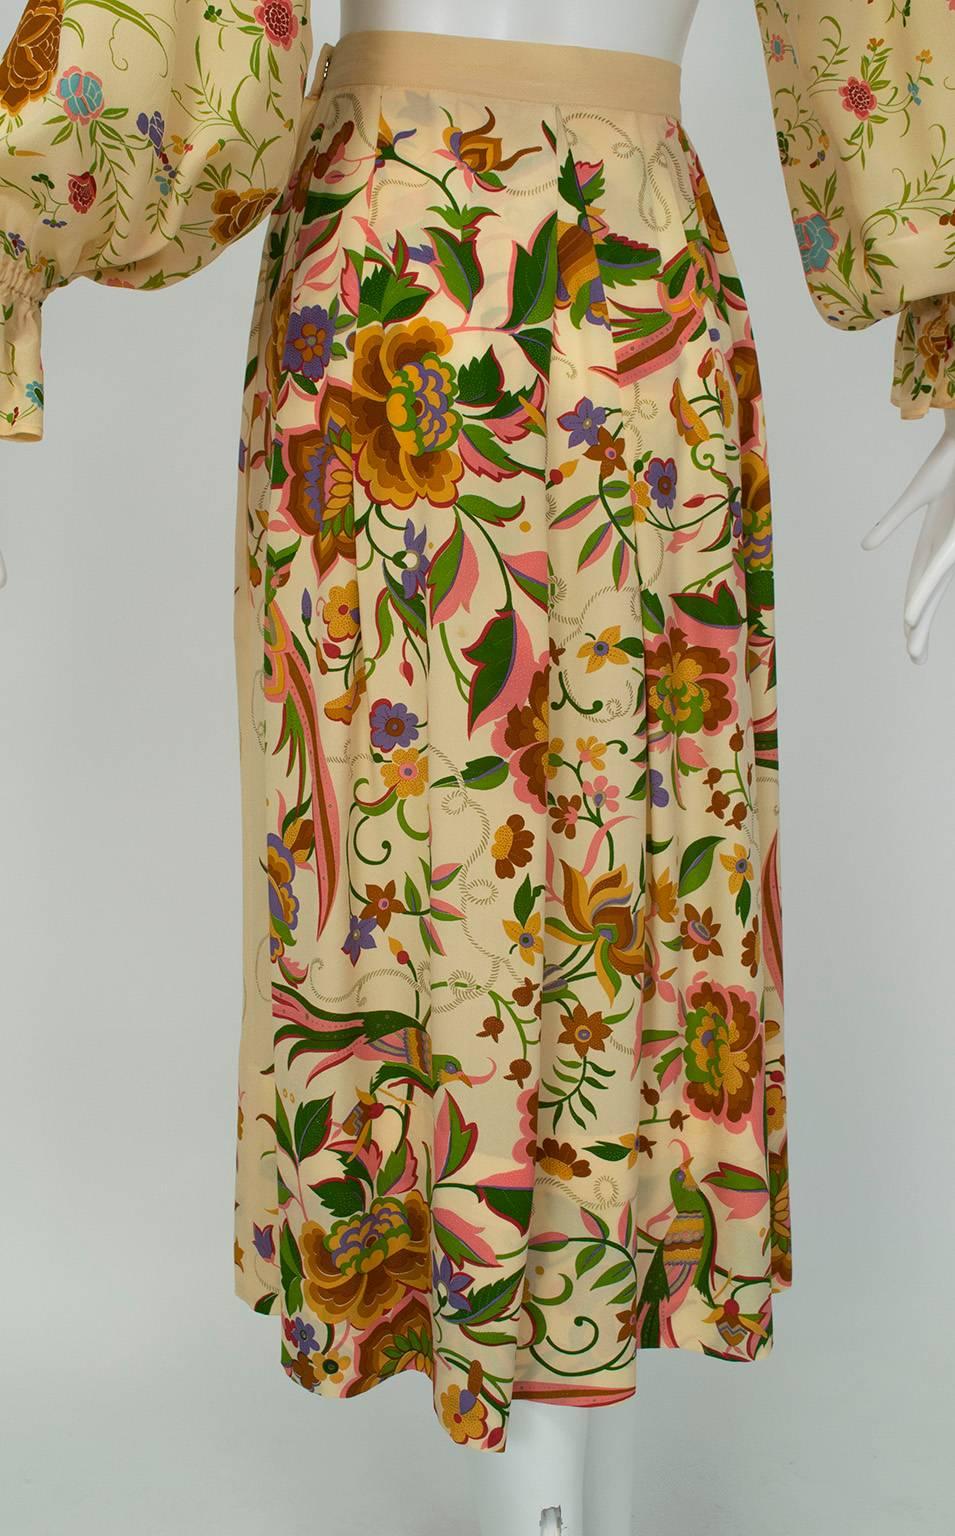 Women's Deanna Littell French Provincial Floral Peasant Blouse and Midi Skirt - M, 1970s